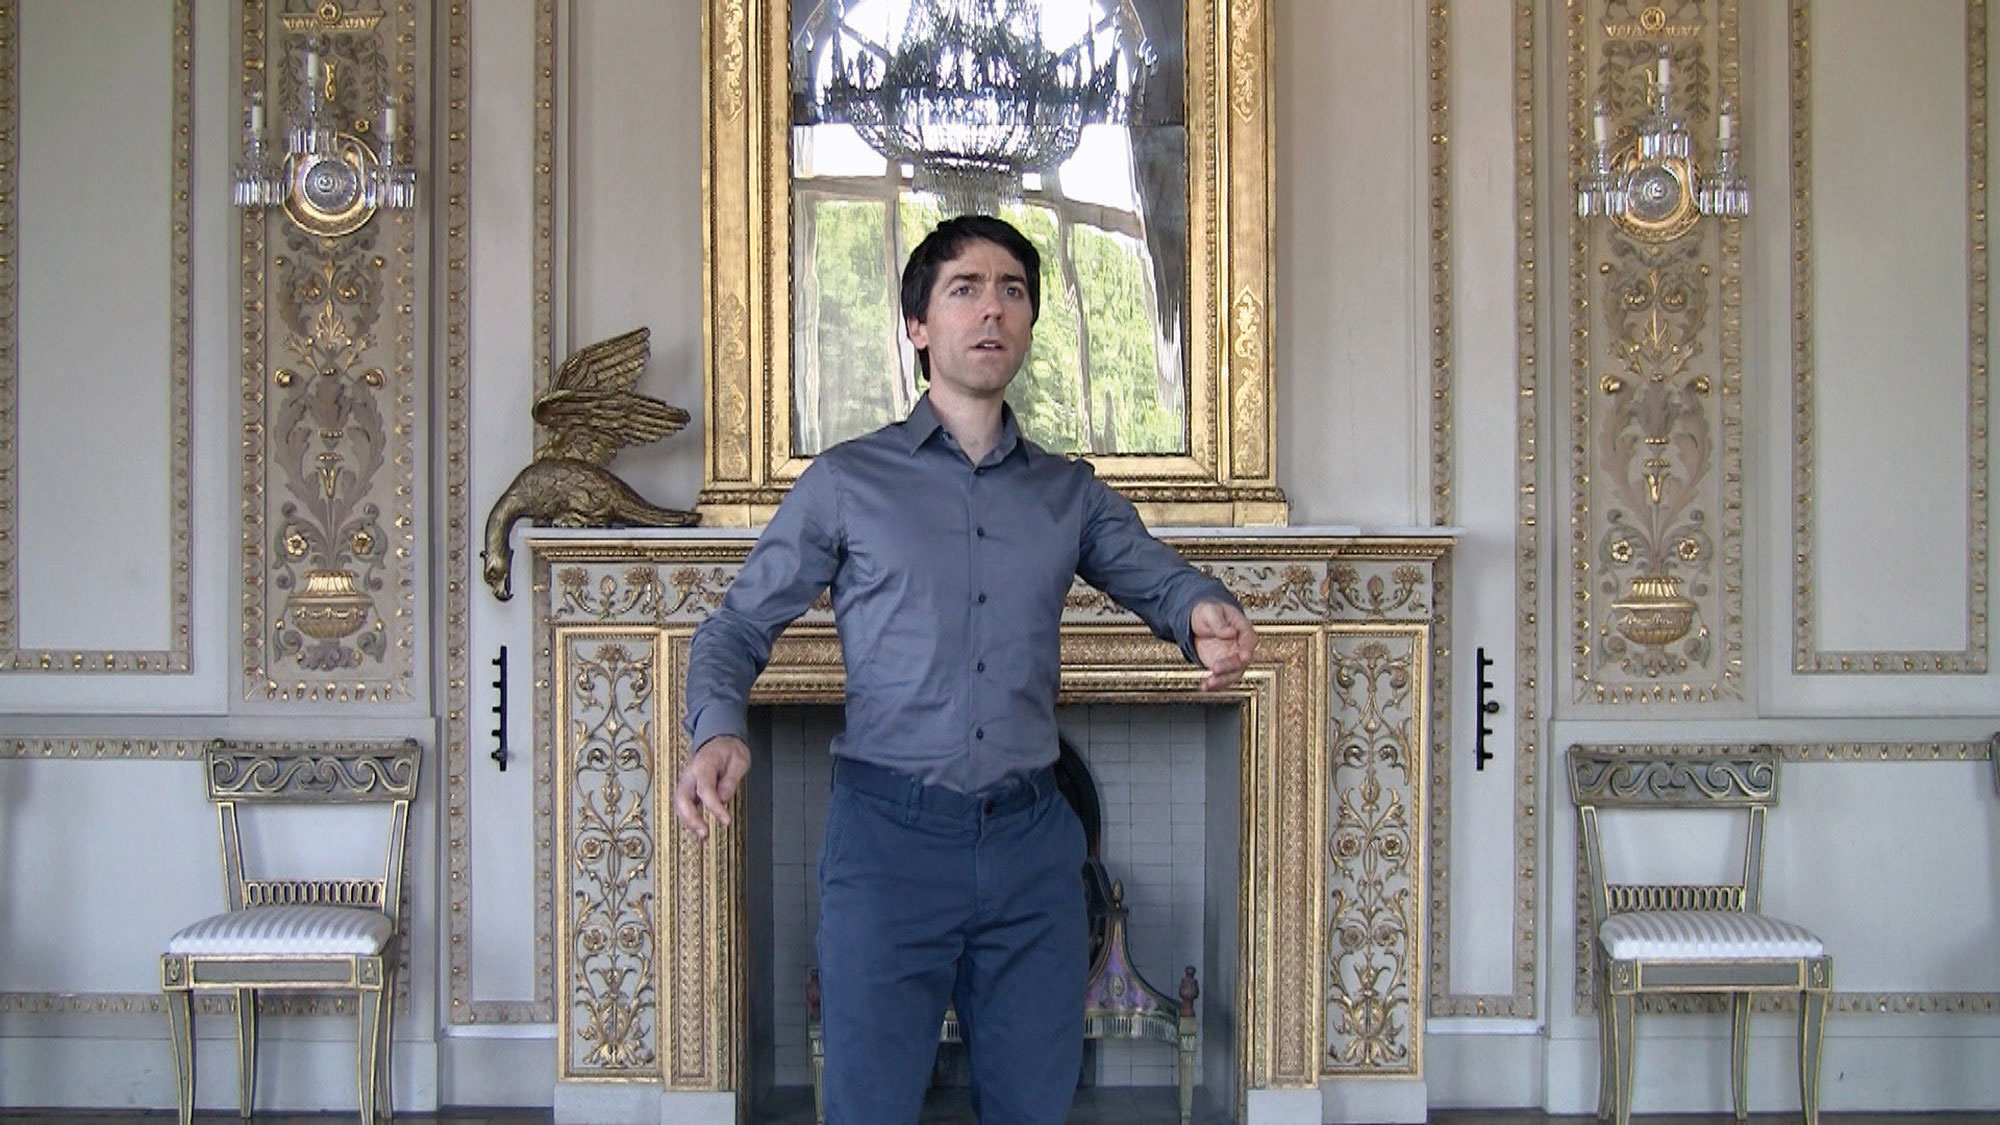 A white man with dark hair wearing a blue button up and pants standing with arms gently gesturing outward in a baroque styled room. 